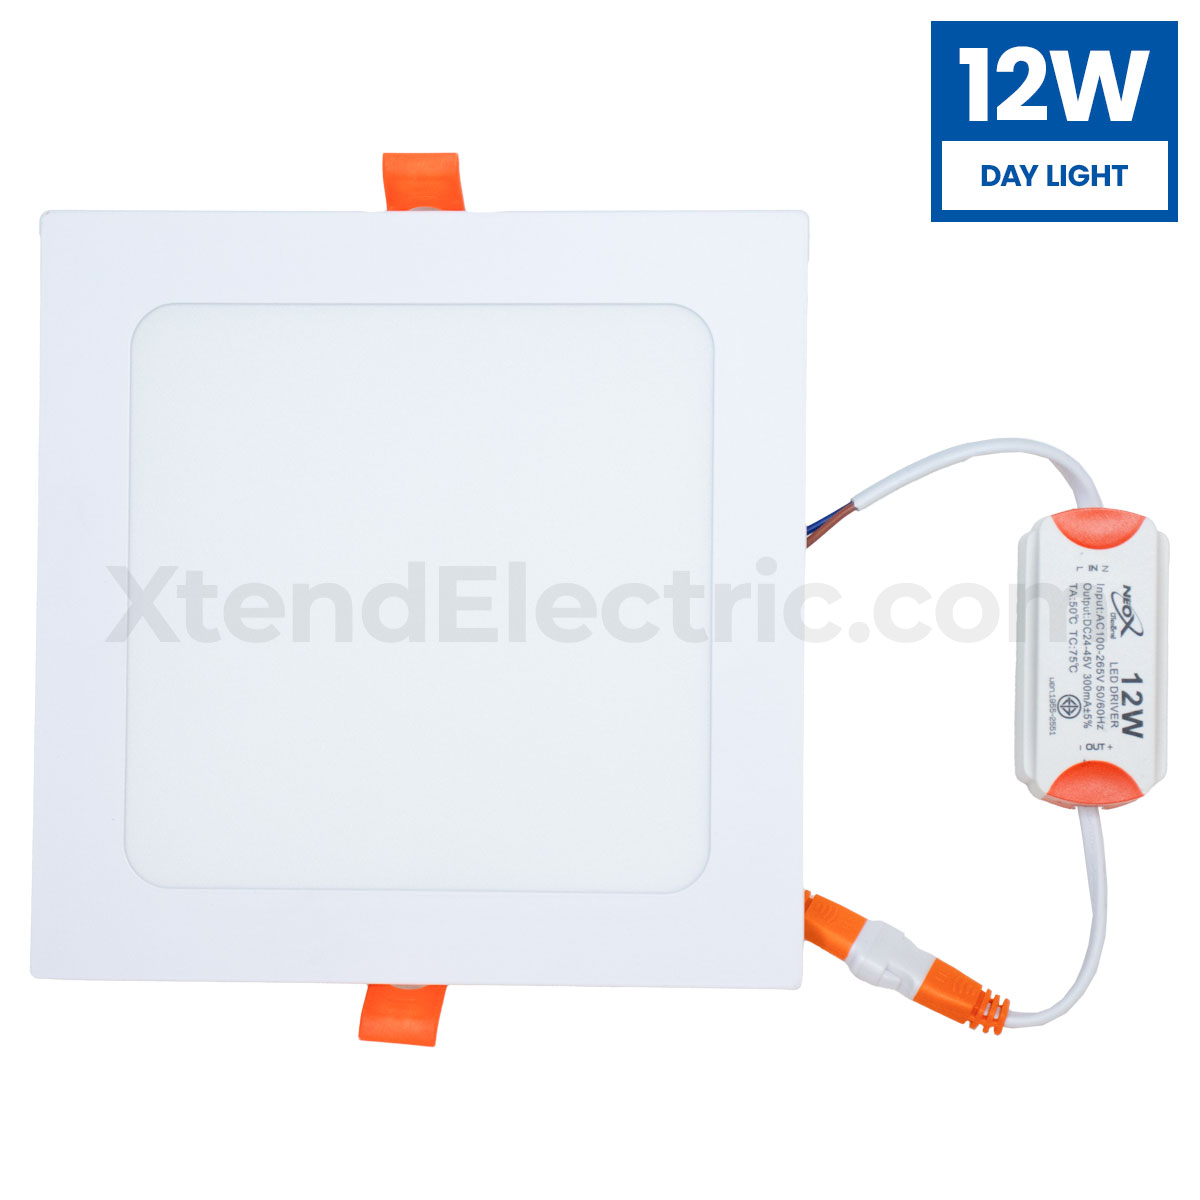 Neox-Downlight-SQ-12w-DL-COVER1